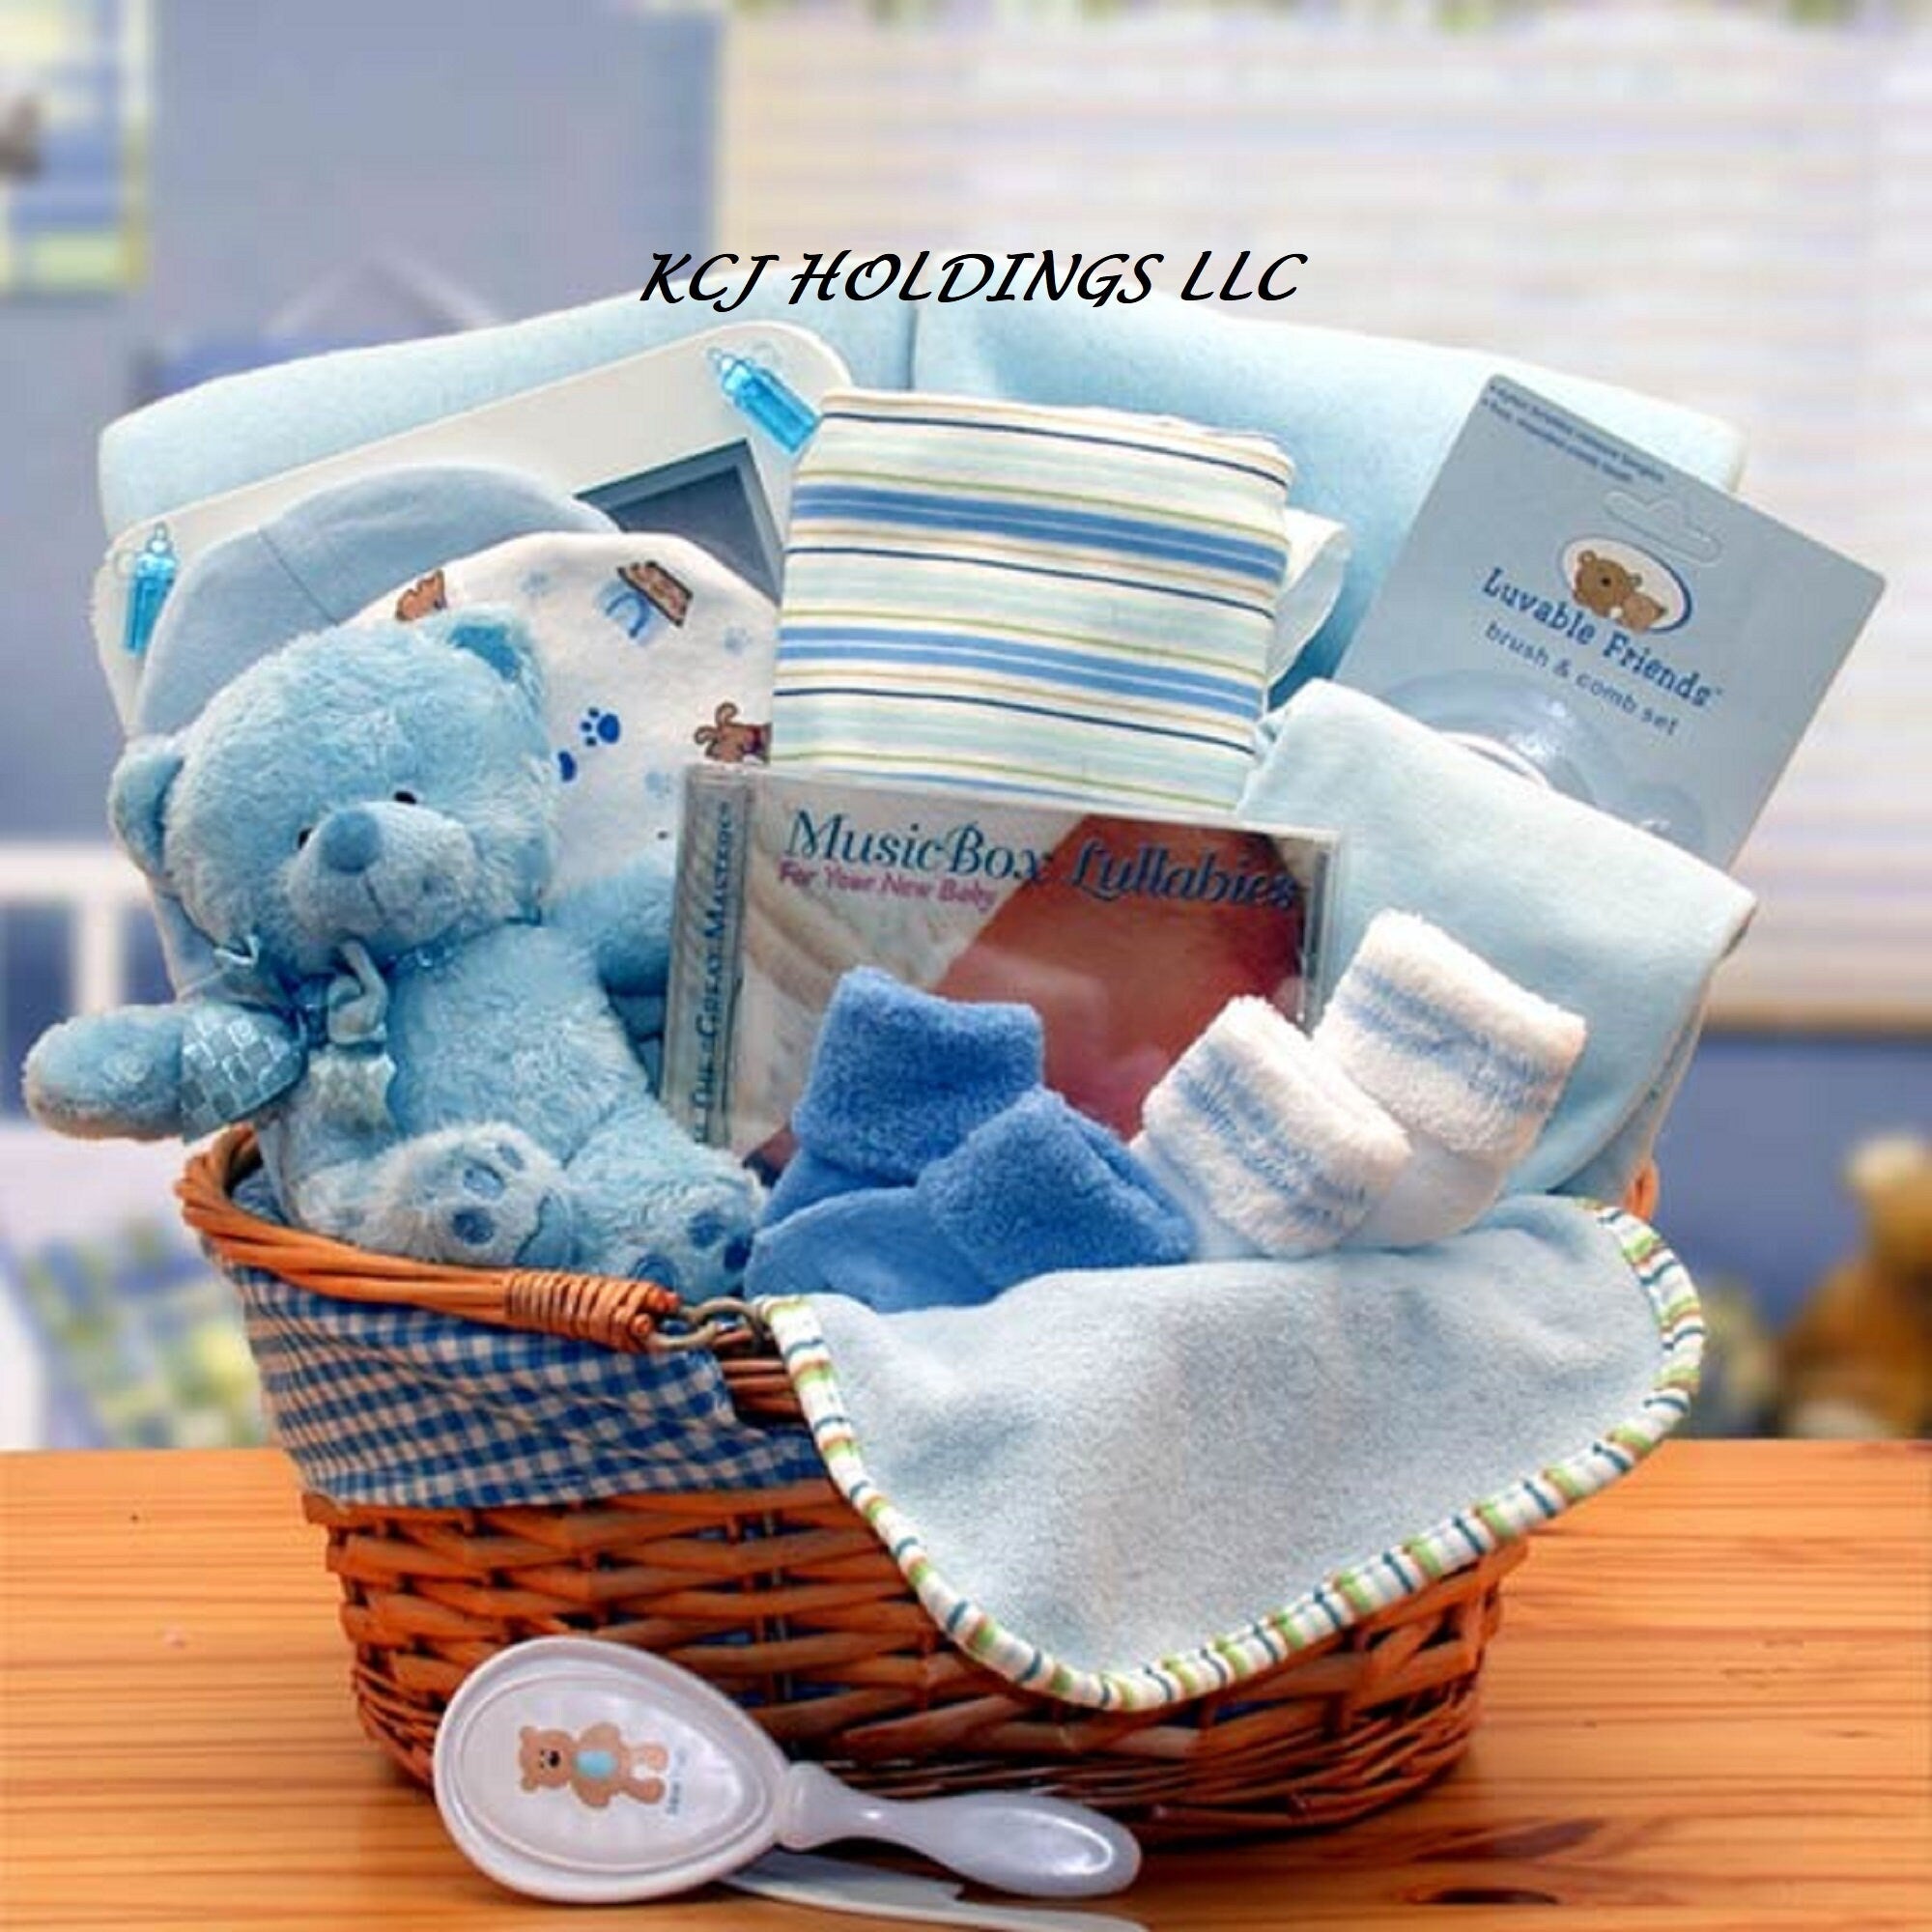 New Baby and Parent Hampers, Baby Shower Gifts